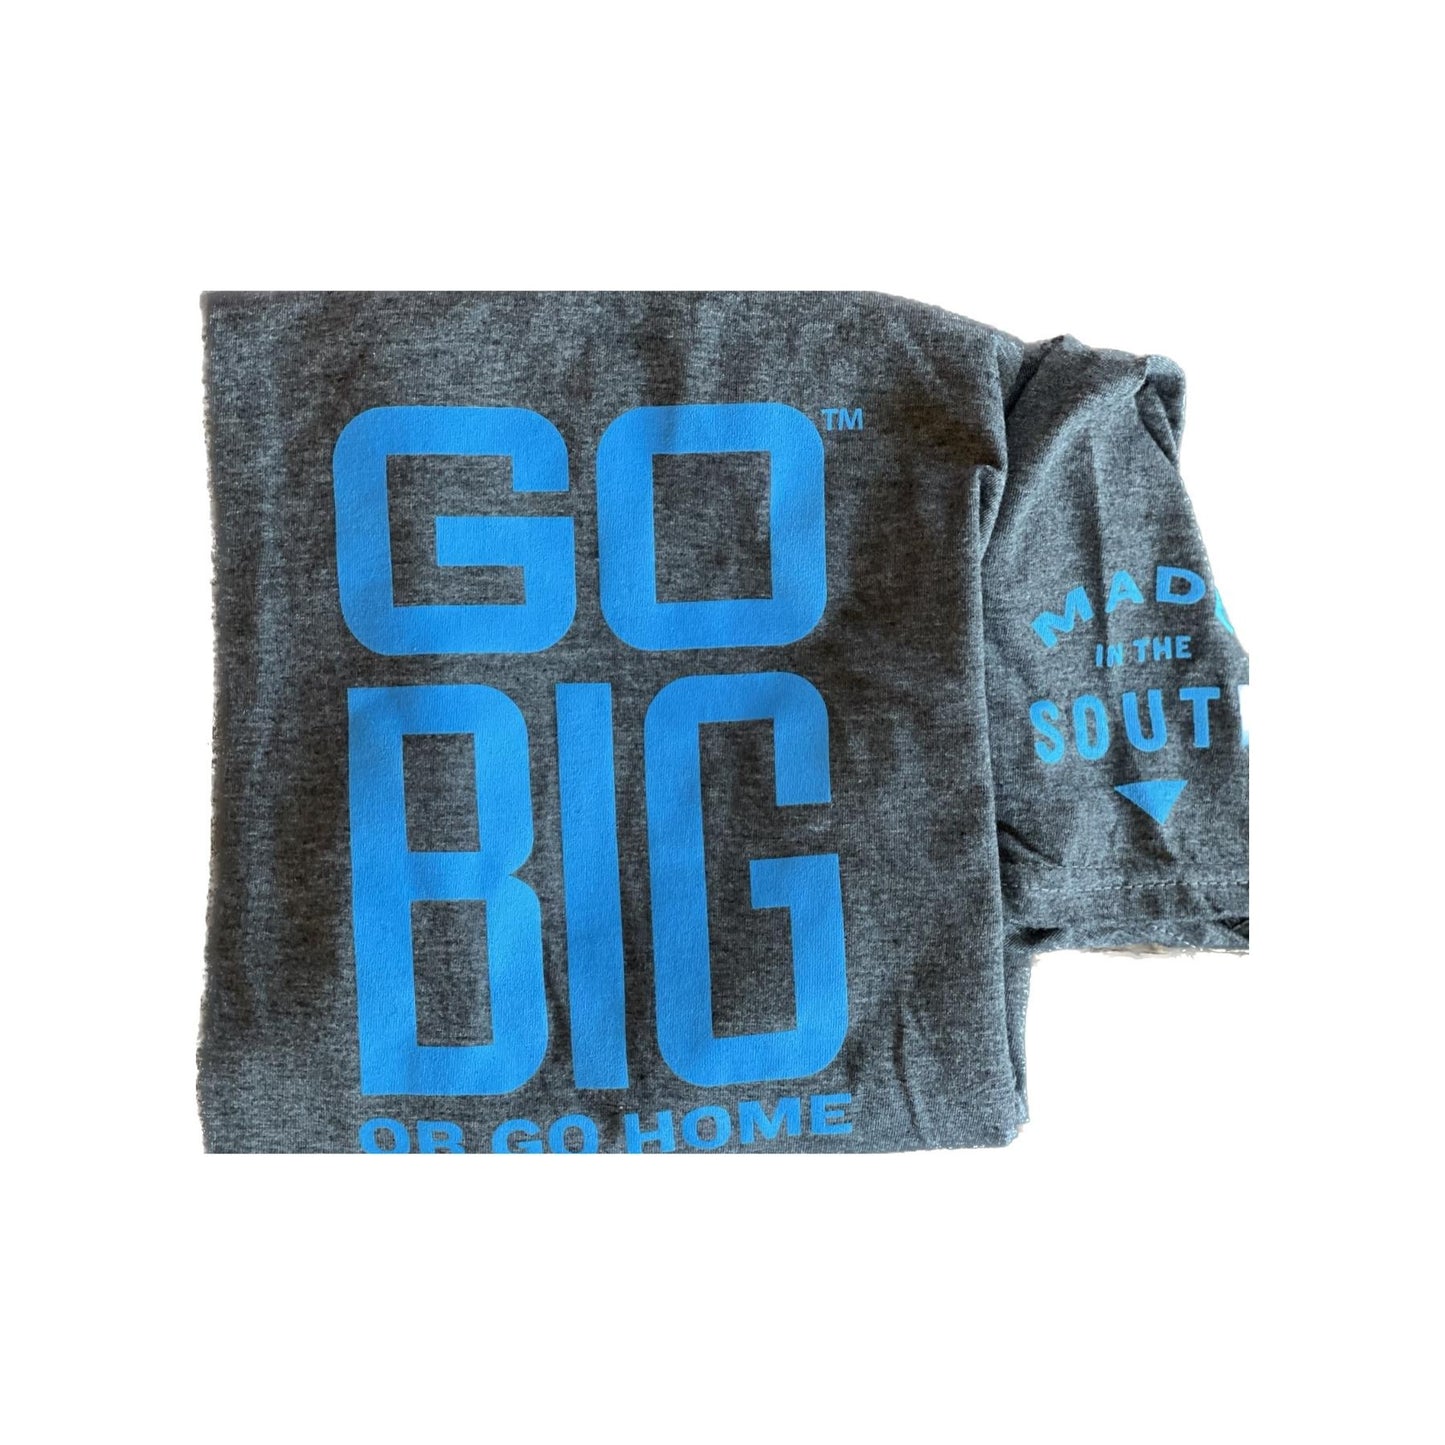 Go Big or Go Home - Gray and Blue T-shirt